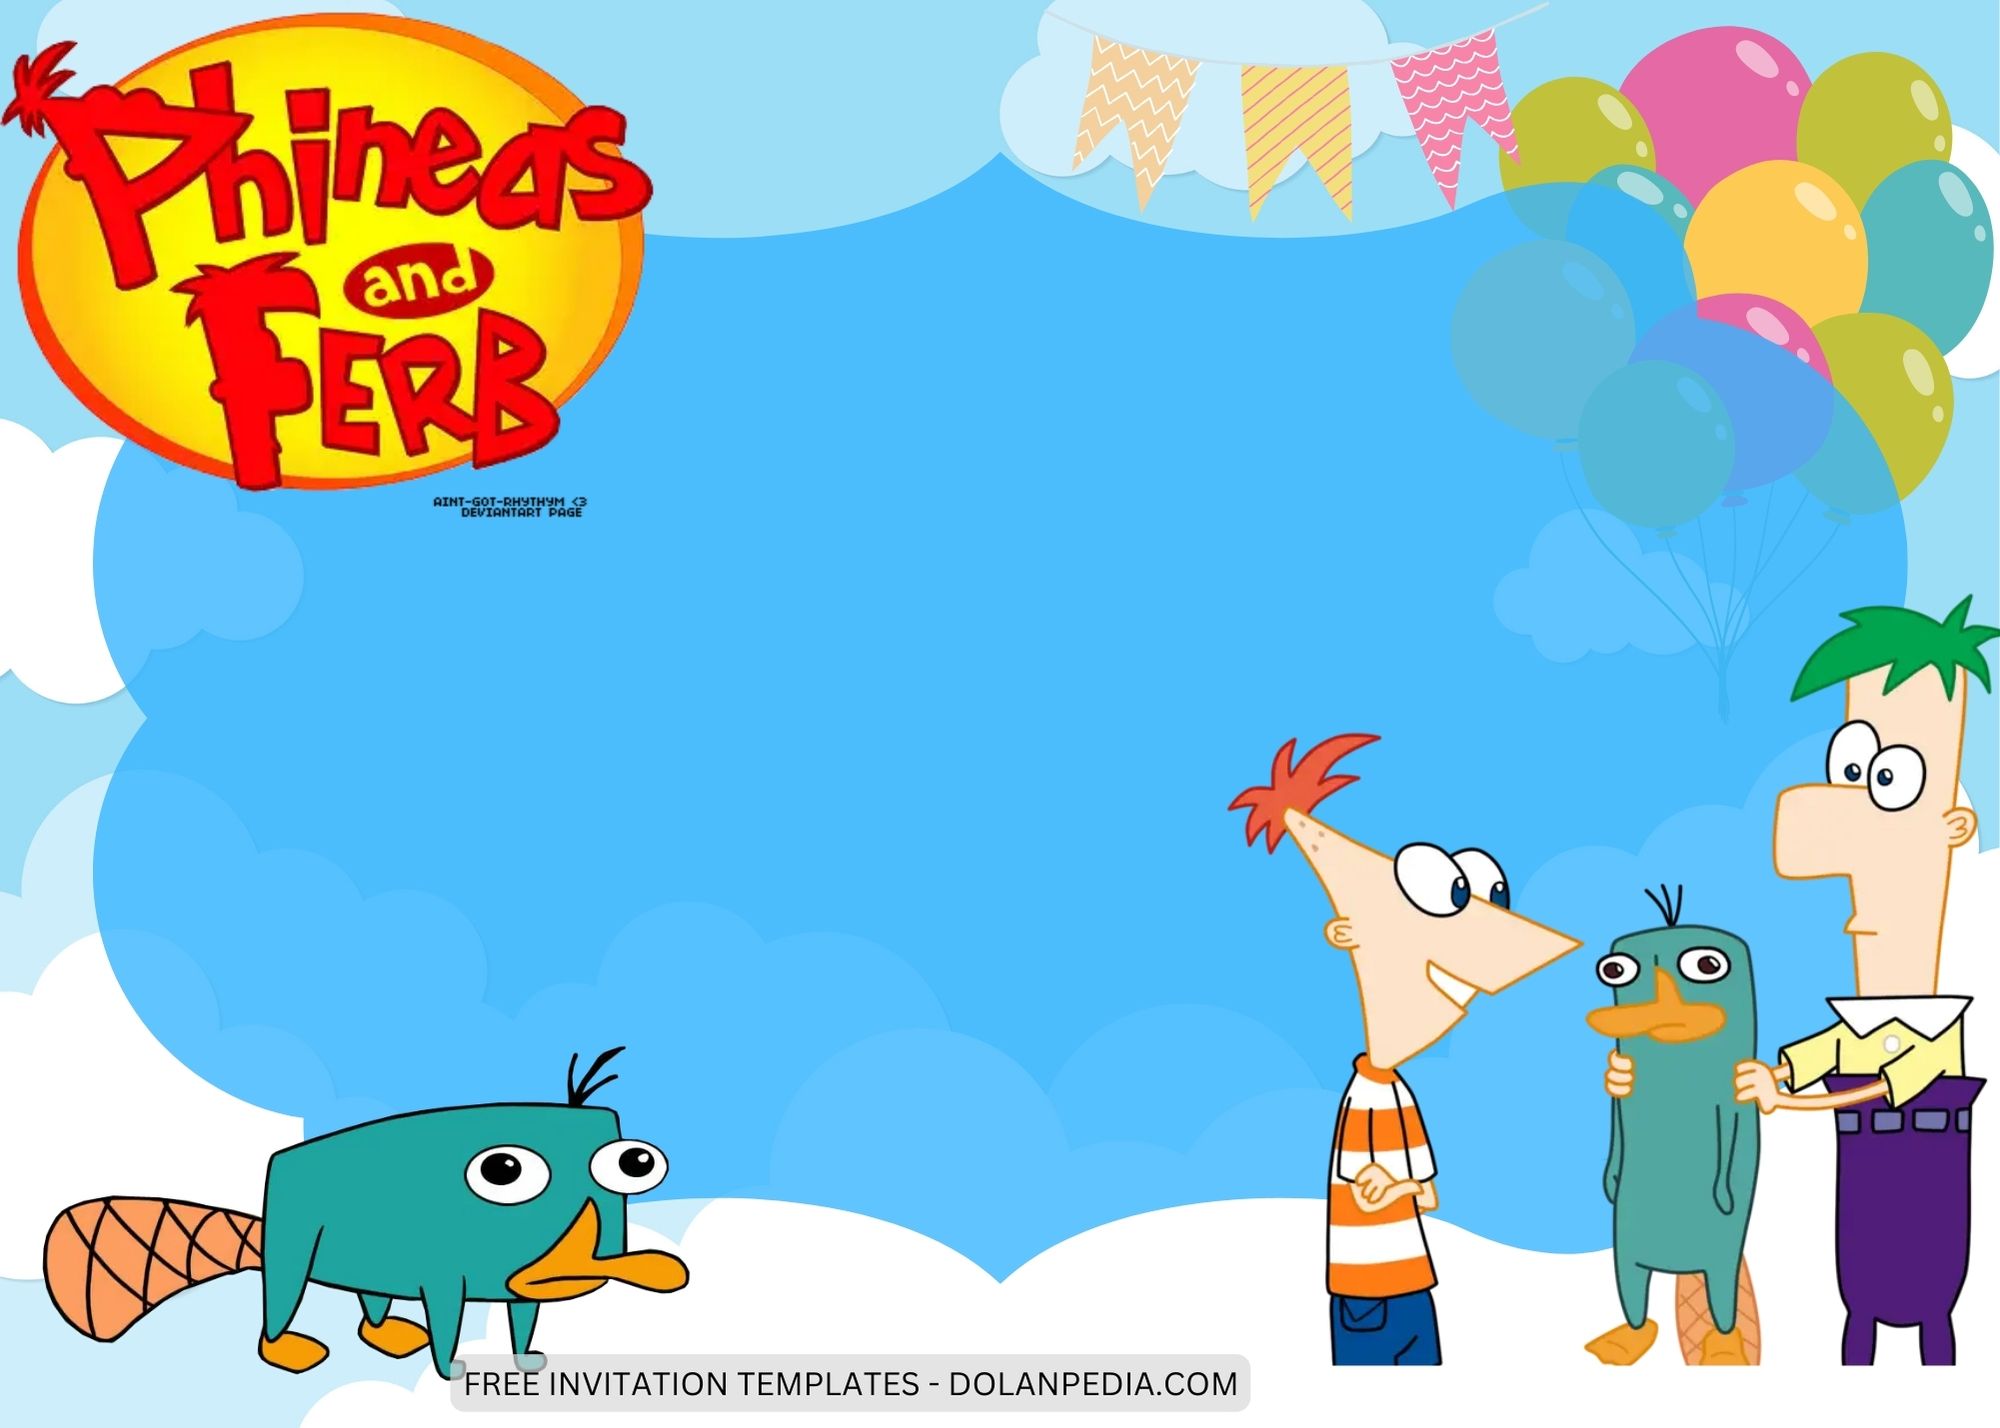 Blank Phineas and Ferb Birthday Invitation Templates Eight